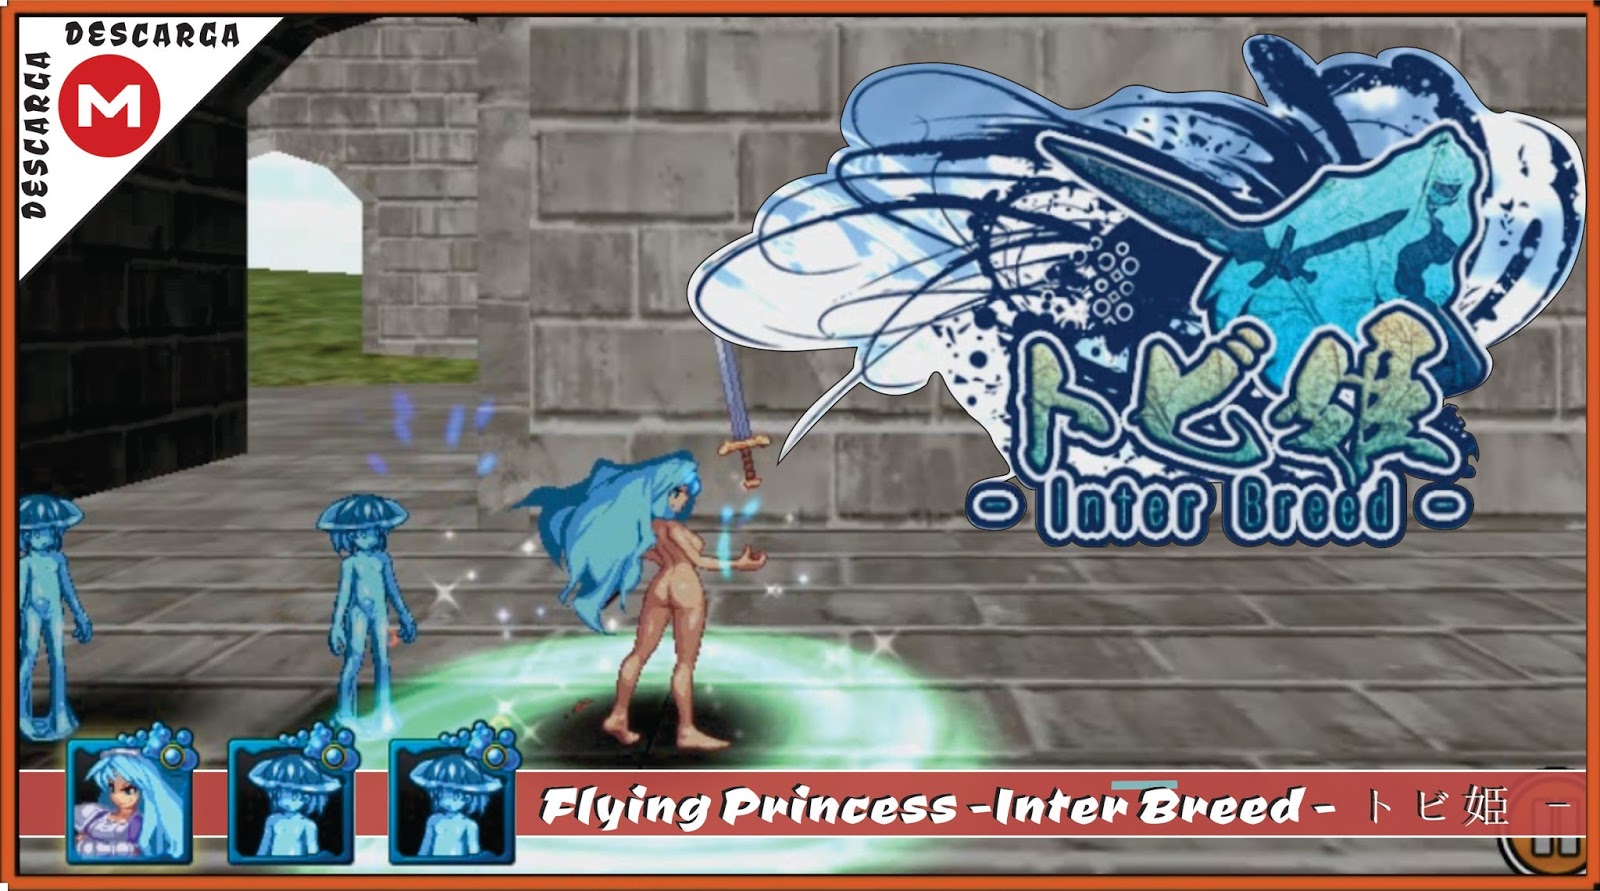 Flying princess inter breed parte